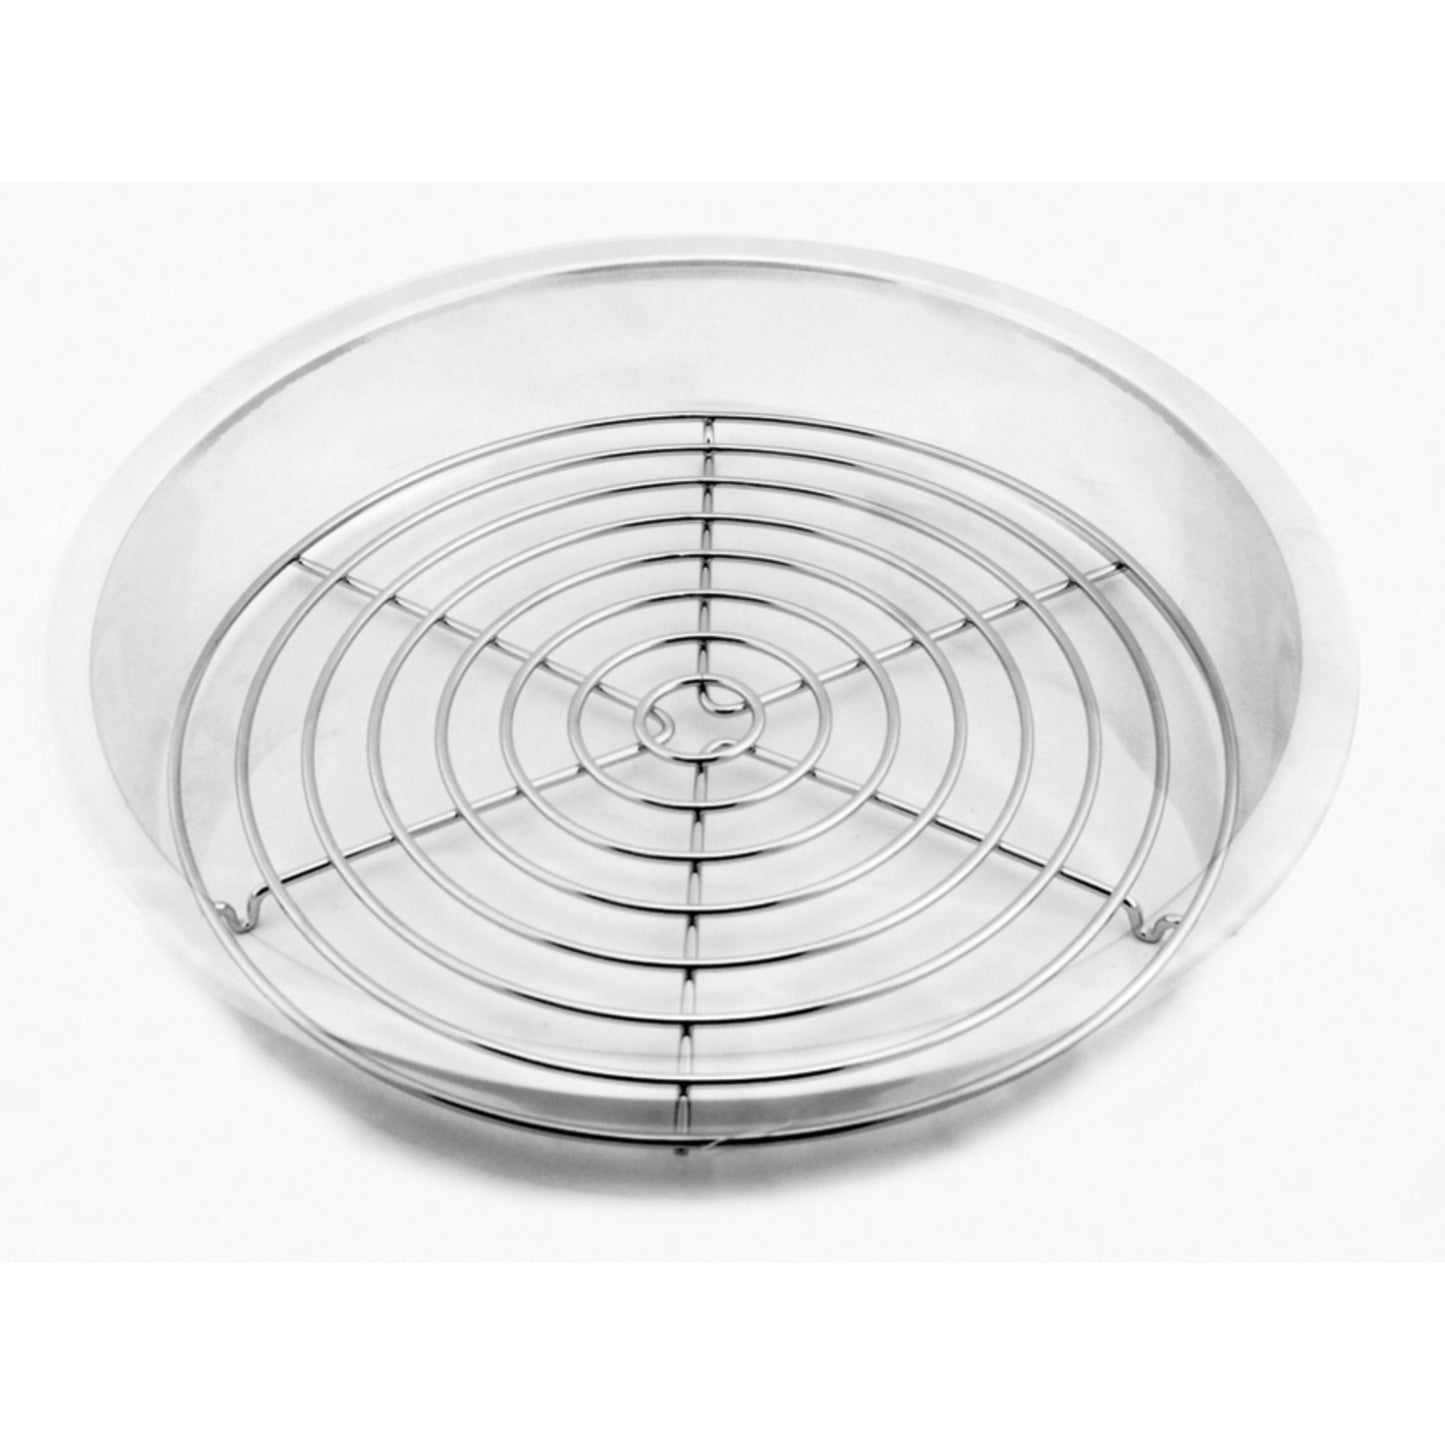 12.5" Full Circle Chrome Wire Grate, 0.75" Tall